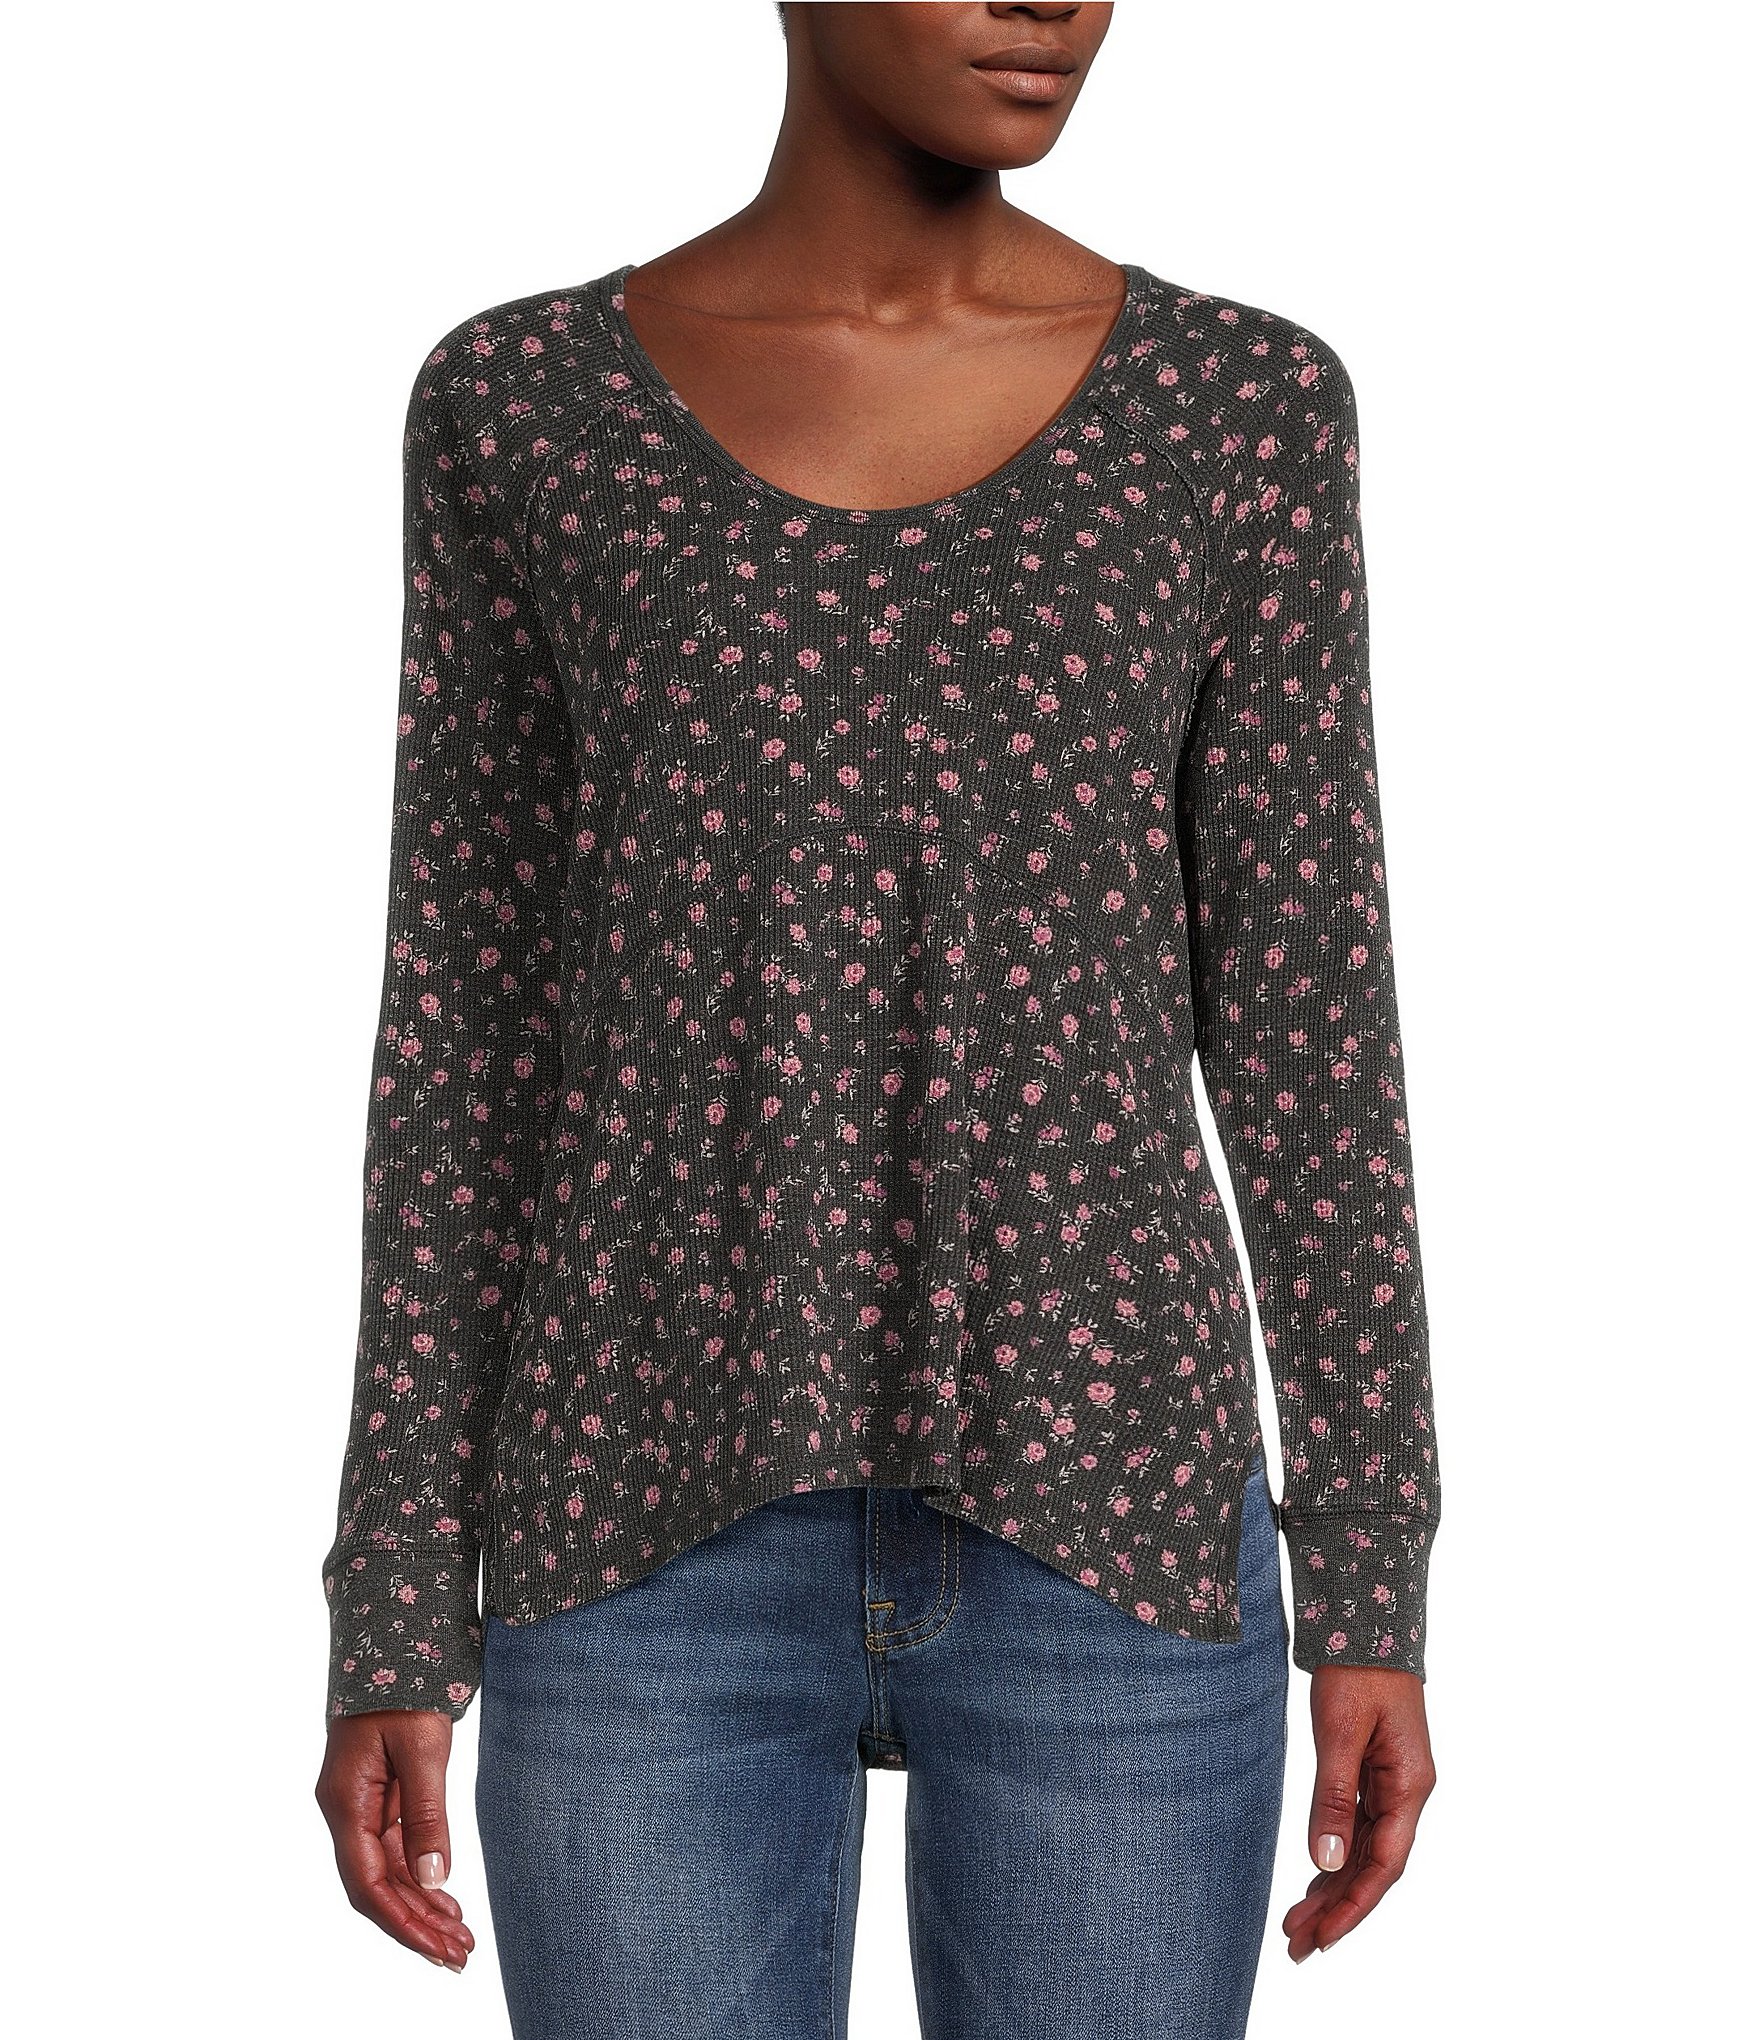 https://dimg.dillards.com/is/image/DillardsZoom/zoom/lucky-brand-waffle-thermal-floral-knit-scoop-neck-long-sleeve-high-low-hem-oversized-fit-top/00000000_zi_62e1b81d-39a3-4bed-a9de-16ed6130f538.jpg